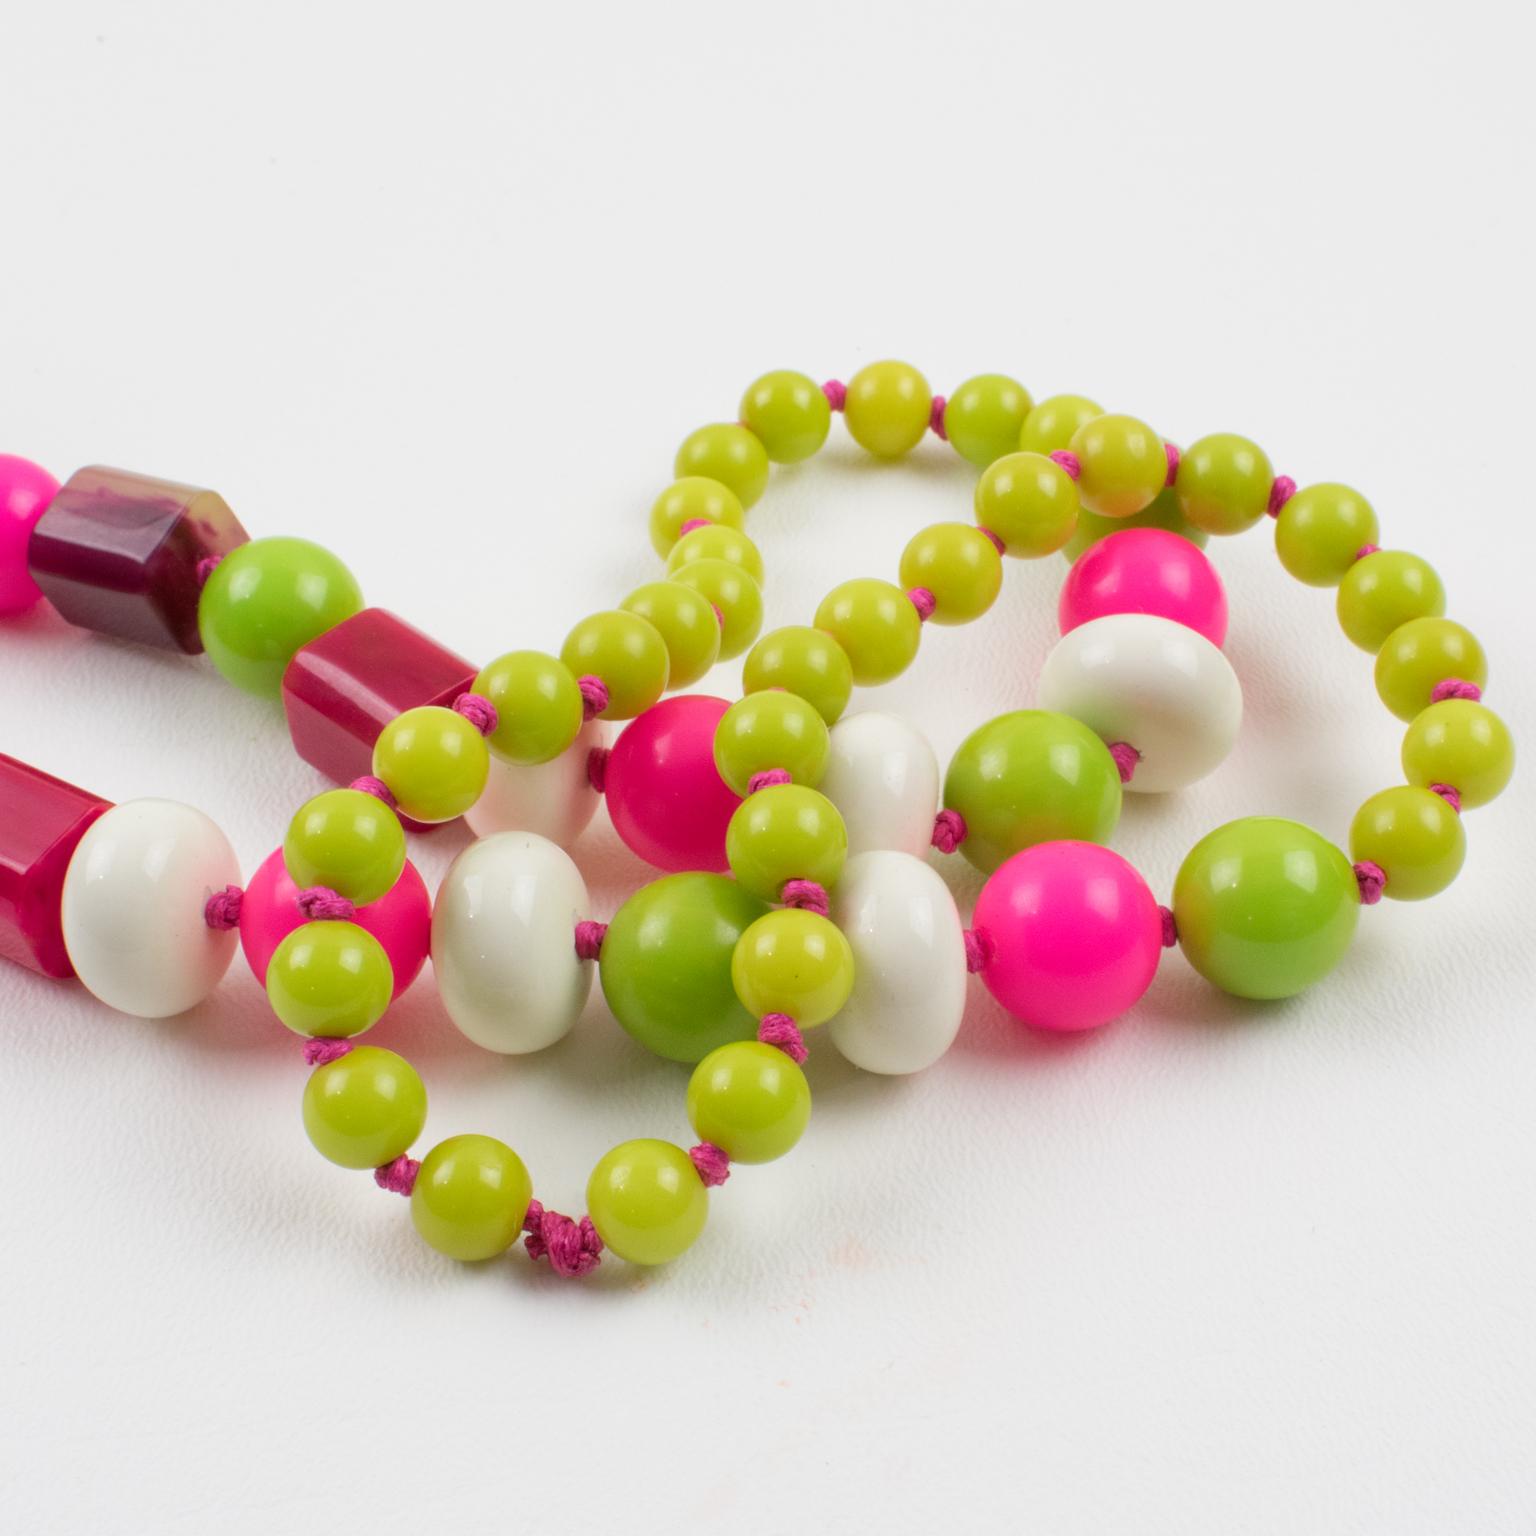 Bakelite and Lucite Long Necklace White, Hot Pink, Apple Green Beads For Sale 4